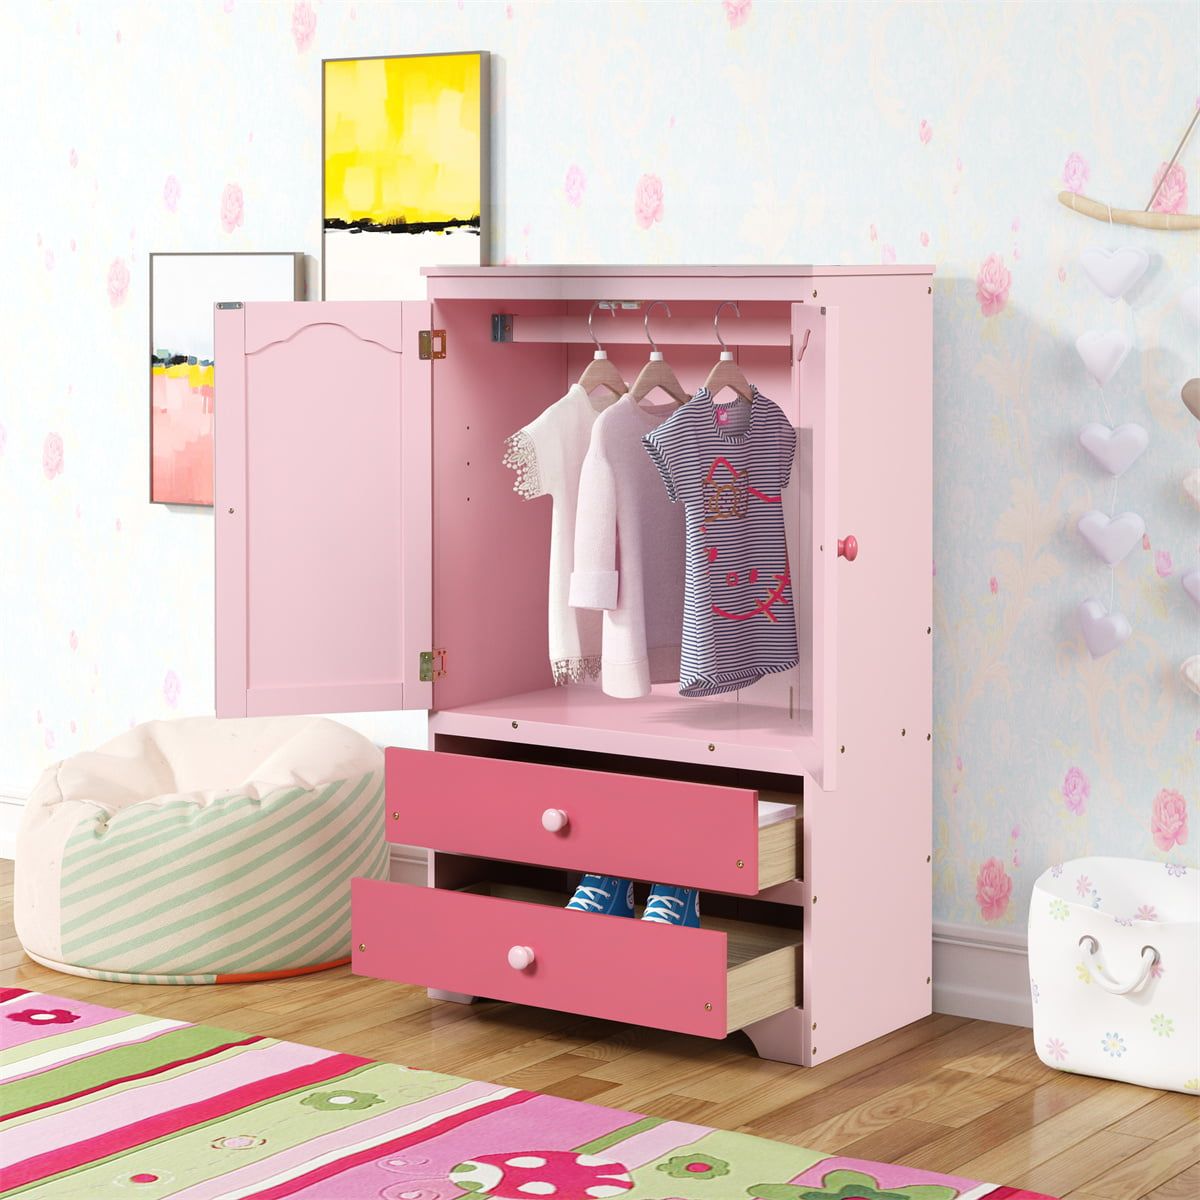 Inclake Pine Wood Kids Play Wardrobe With 2 Doors And 2 Drawers, Children  Dress Up Storage Side Cabinet Clothes Hanging Closet With A Clothes Rail  And A Adjustable Shelf, Pink – Walmart Regarding Kids Pine Wardrobes (View 10 of 15)